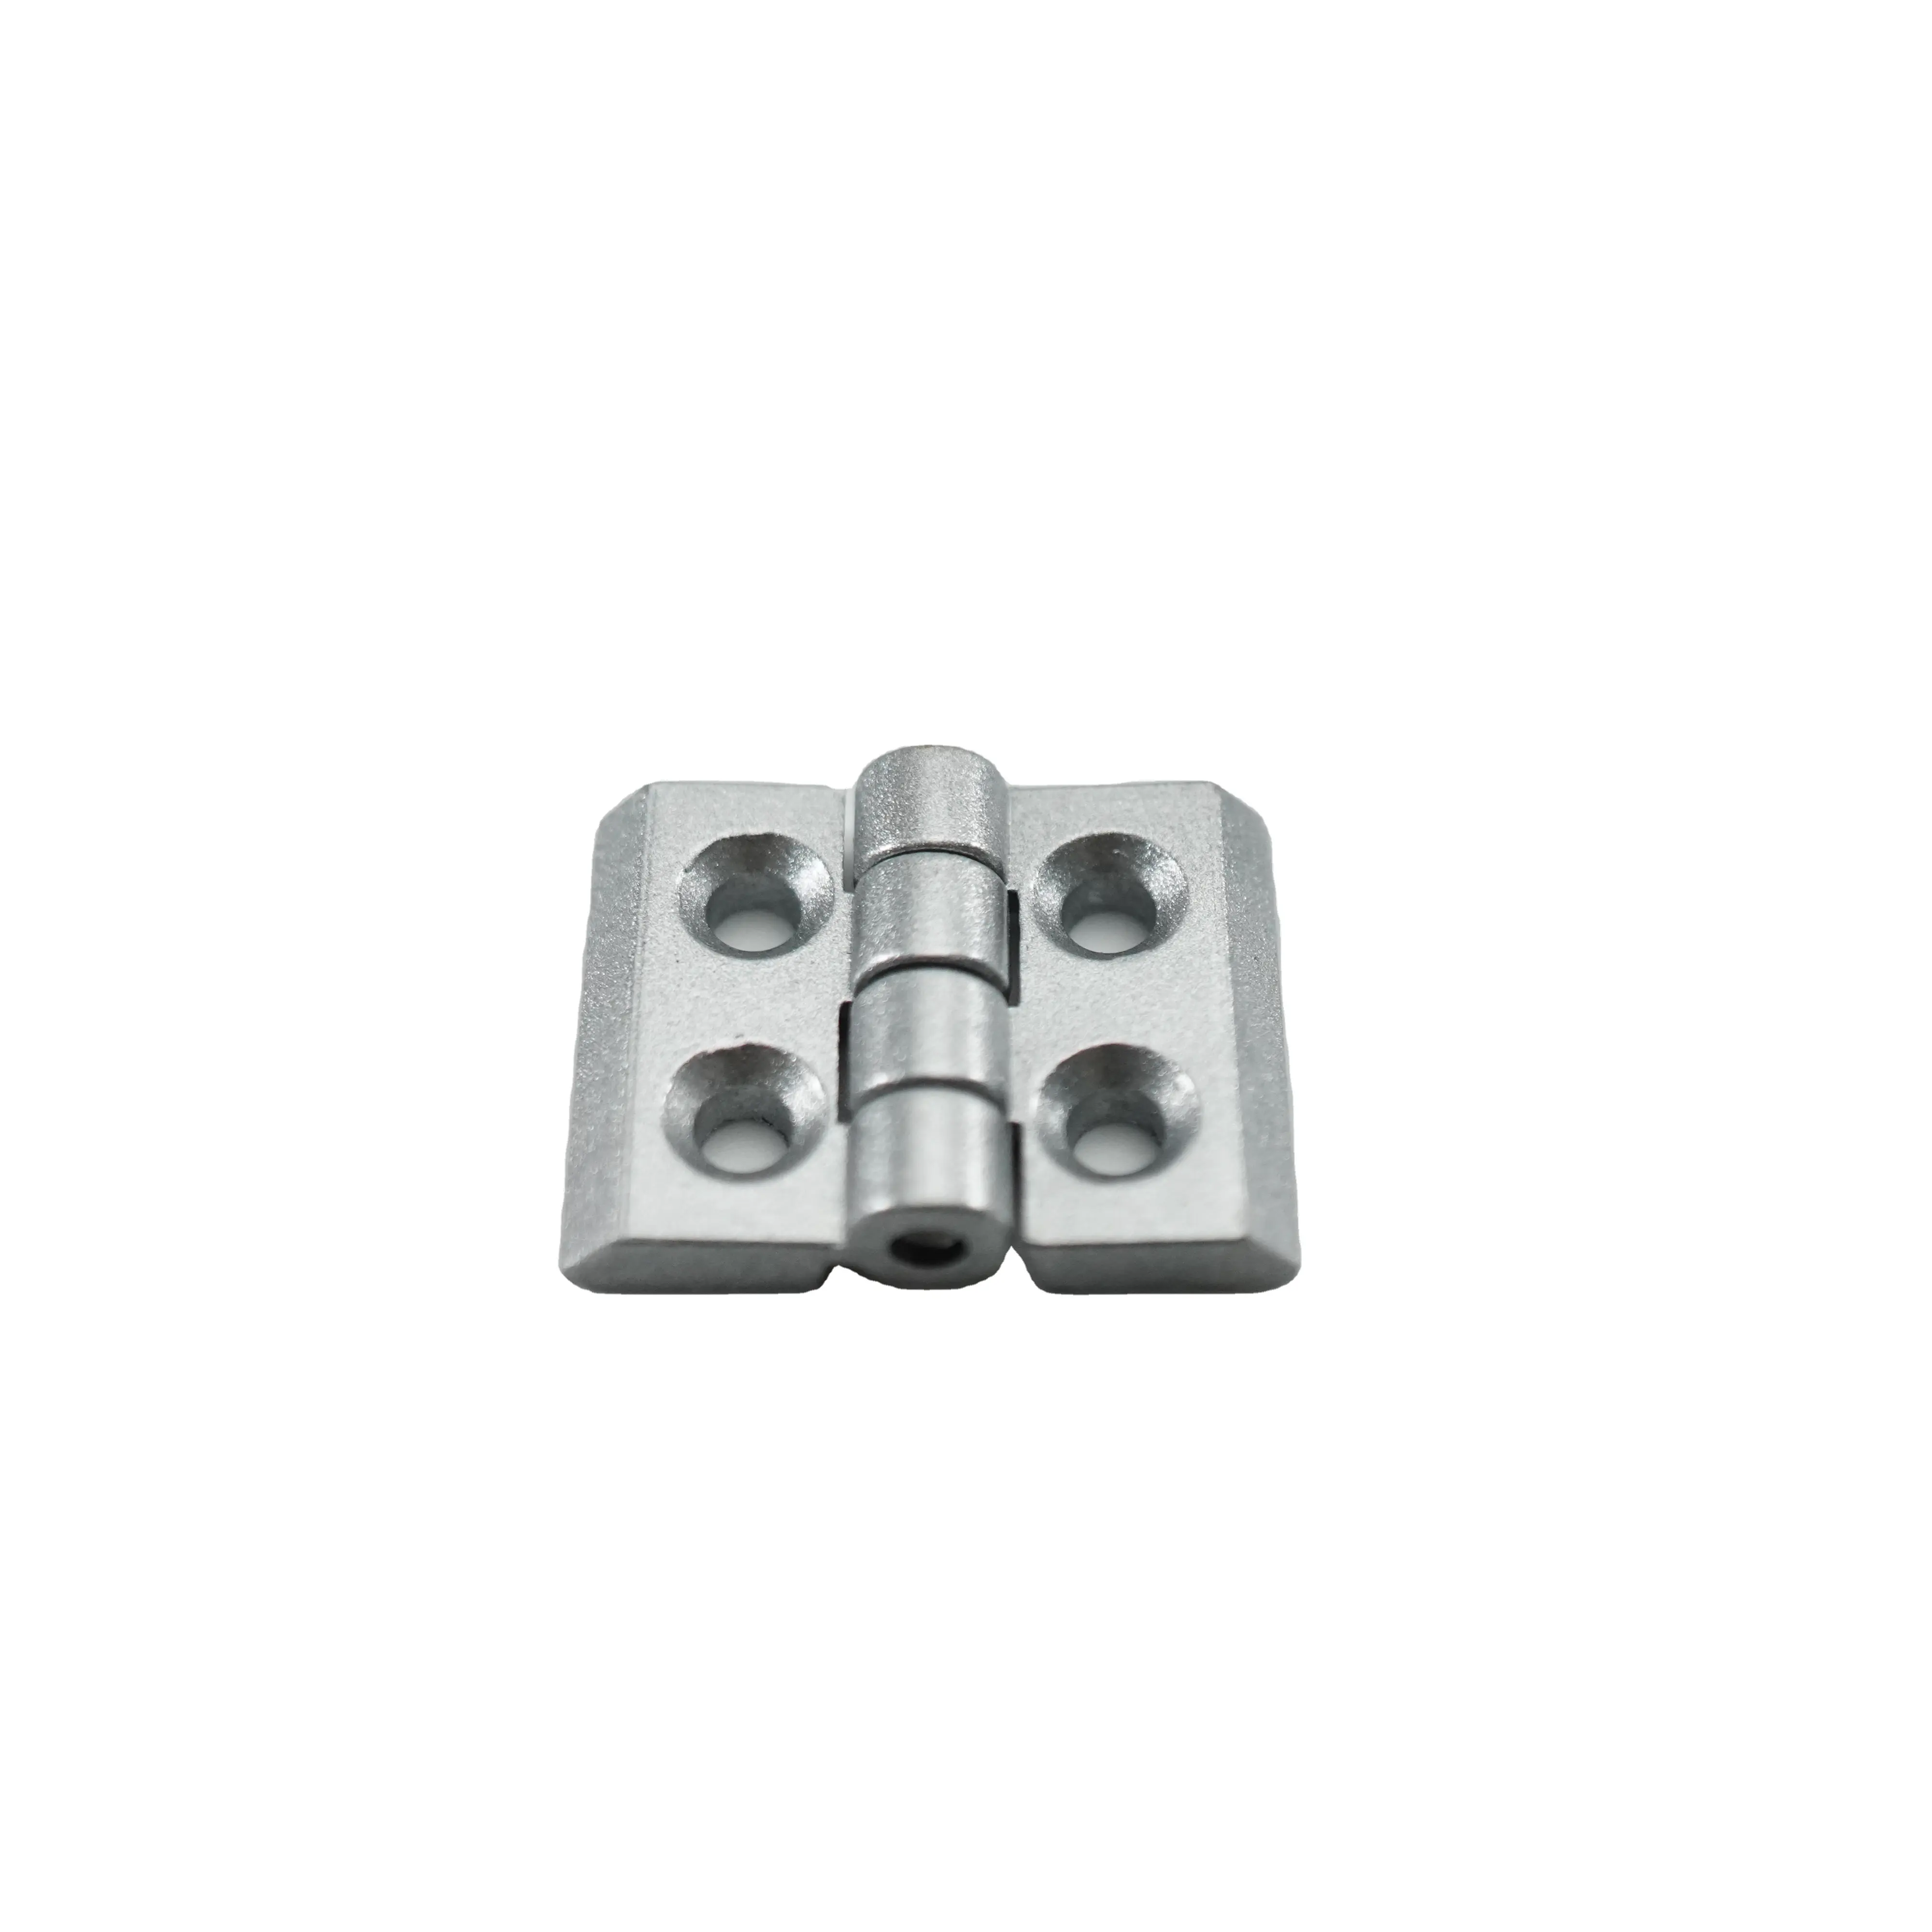 Random angle Arbitrary positioning control adjustable Torque Widely Used Flexible Rotation zinc alloy hinges